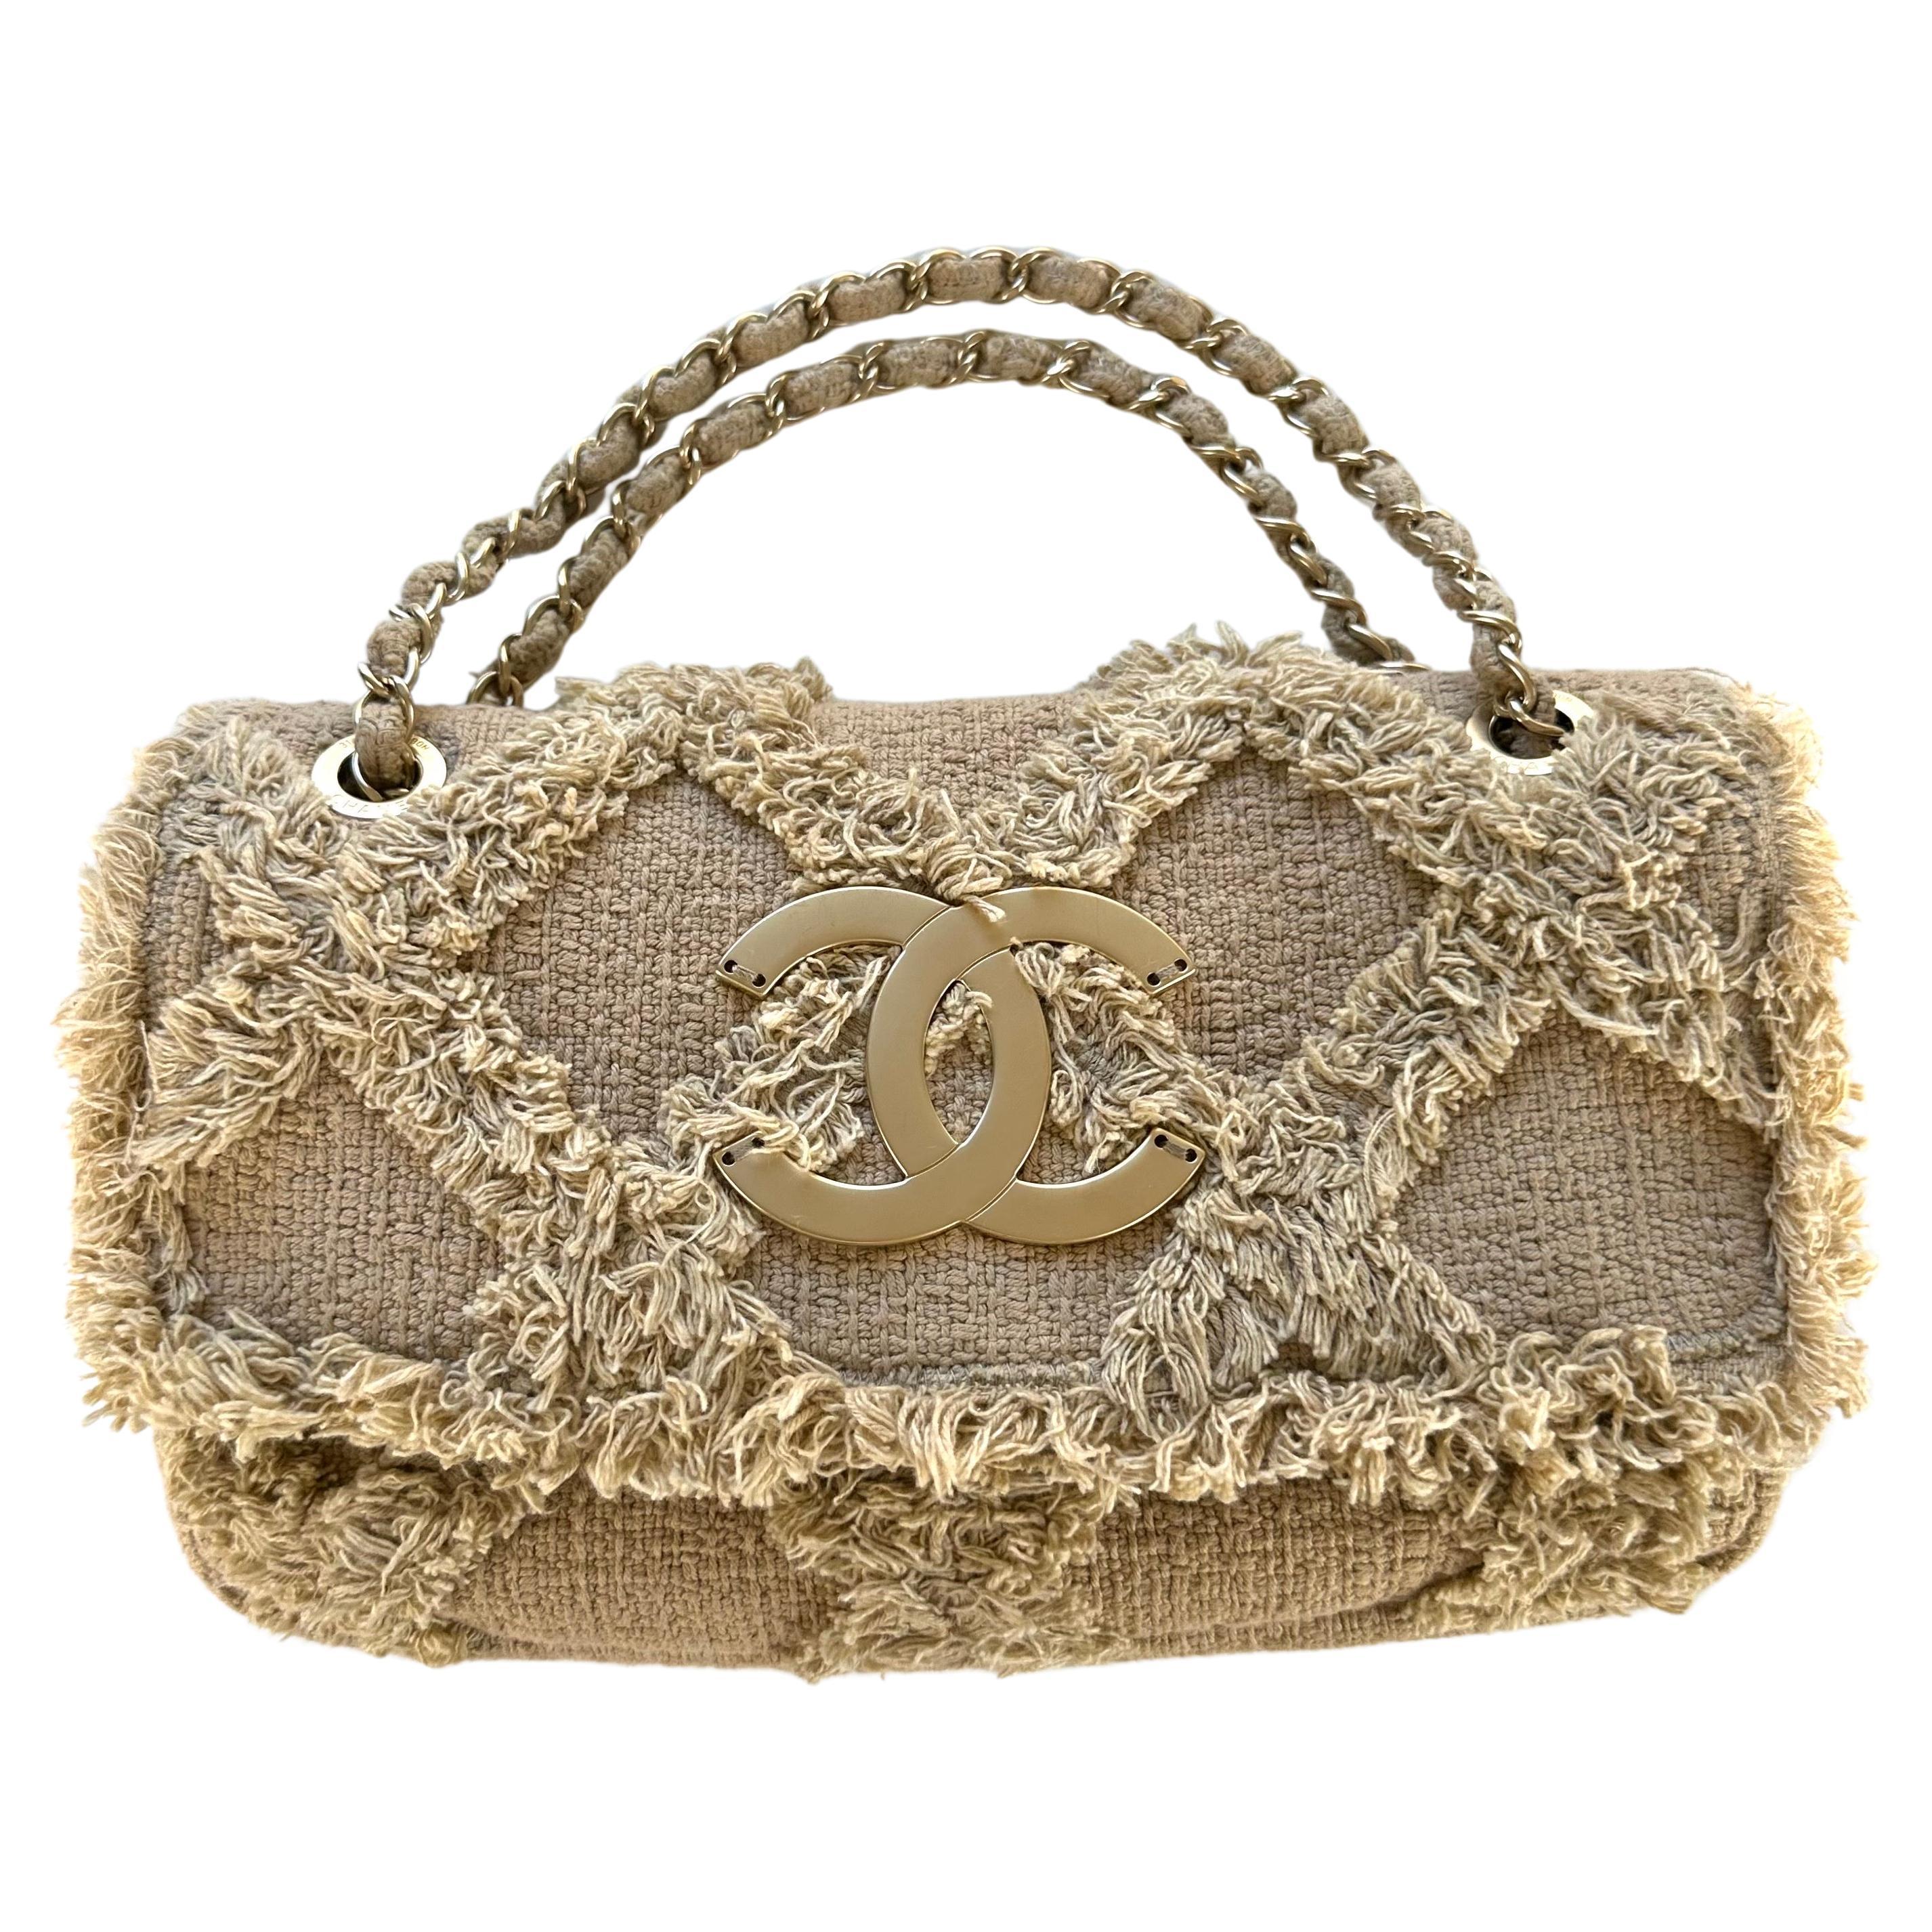 Chanel 2009 Small Sized Beige Tweed Fringe Organic Crochet Nature Flap Bag For Sale